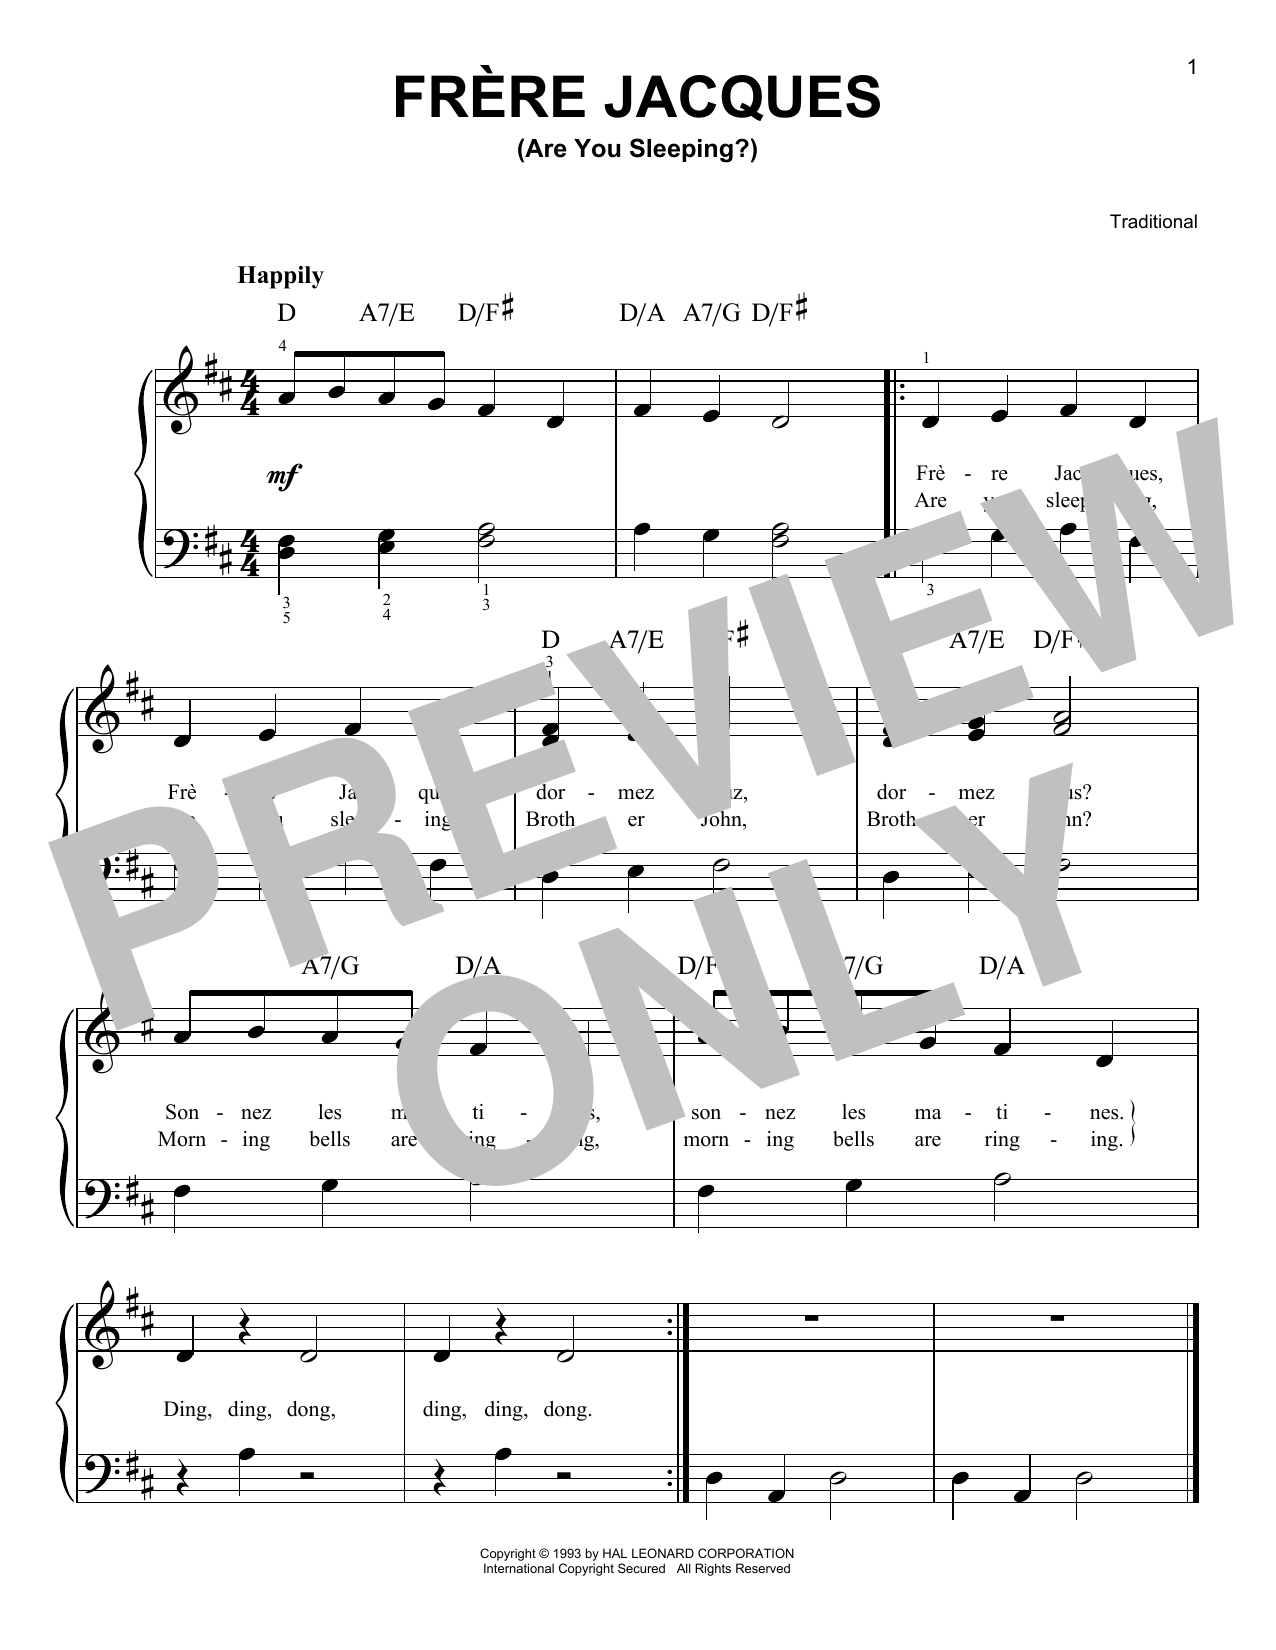 Download Traditional Frere Jacques (Are You Sleeping?) Sheet Music